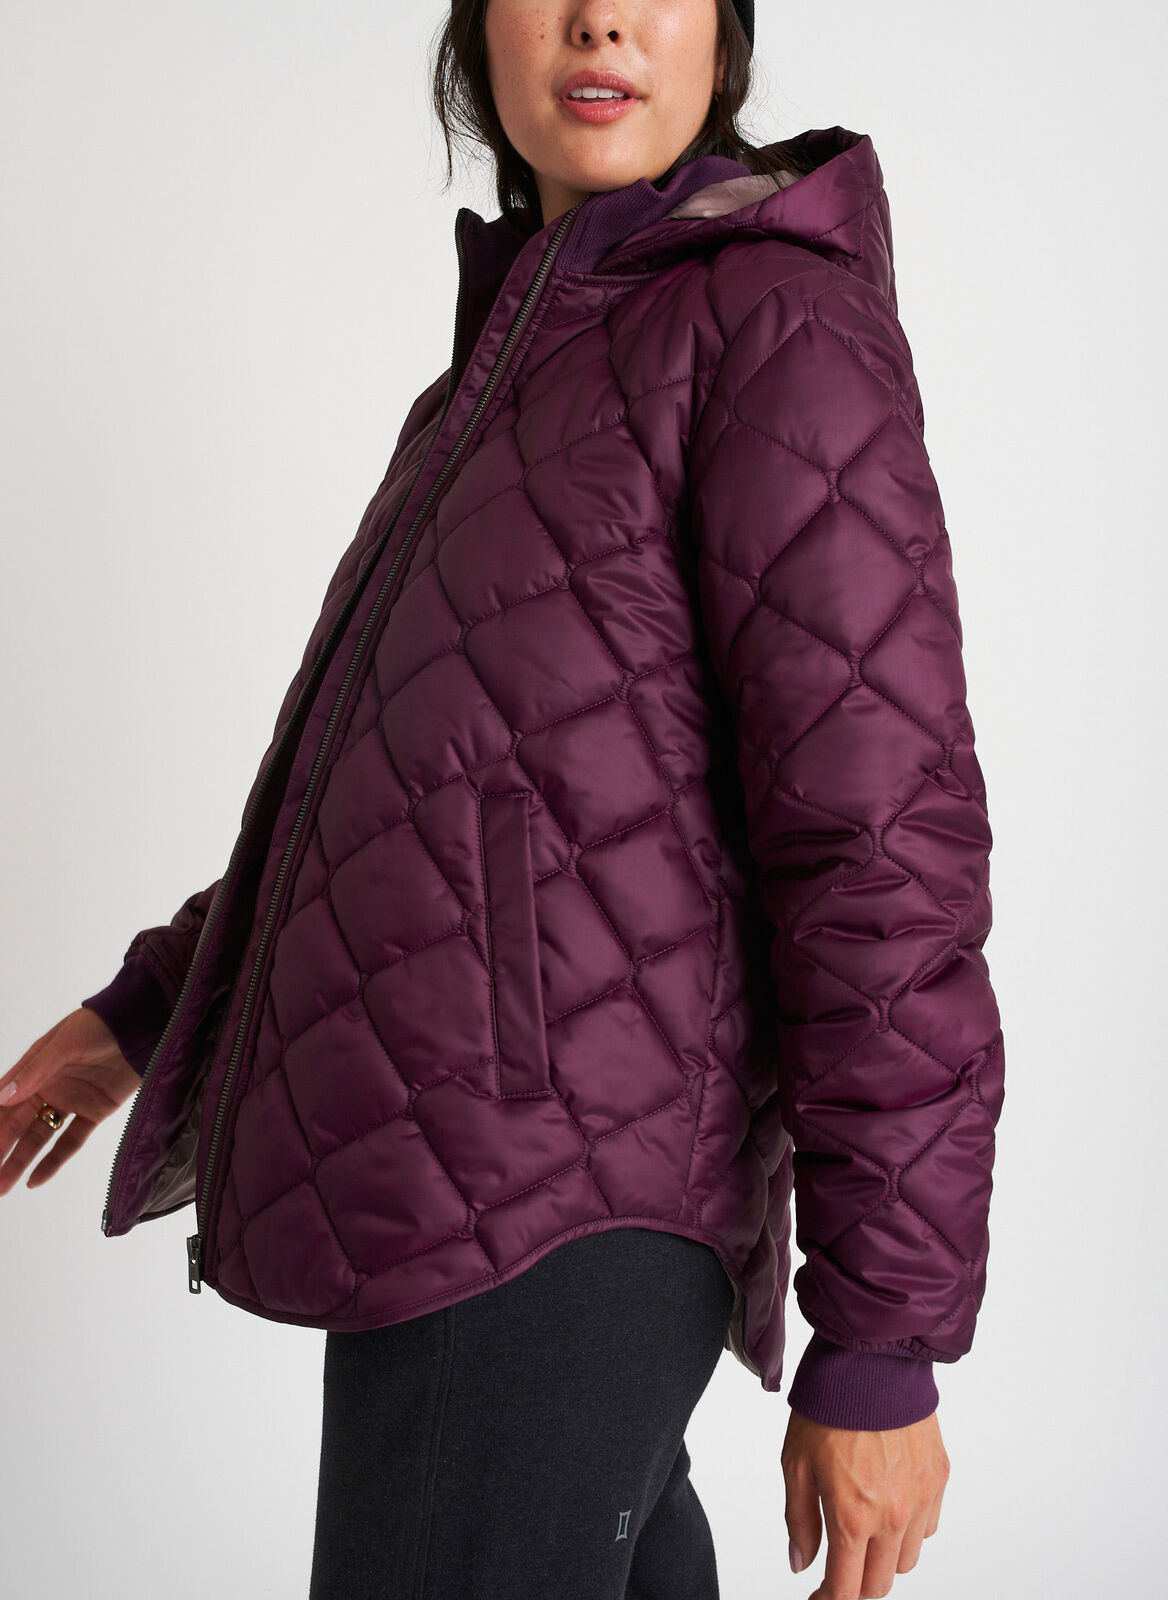 Kit and Ace — All Day Short Puffer Jacket